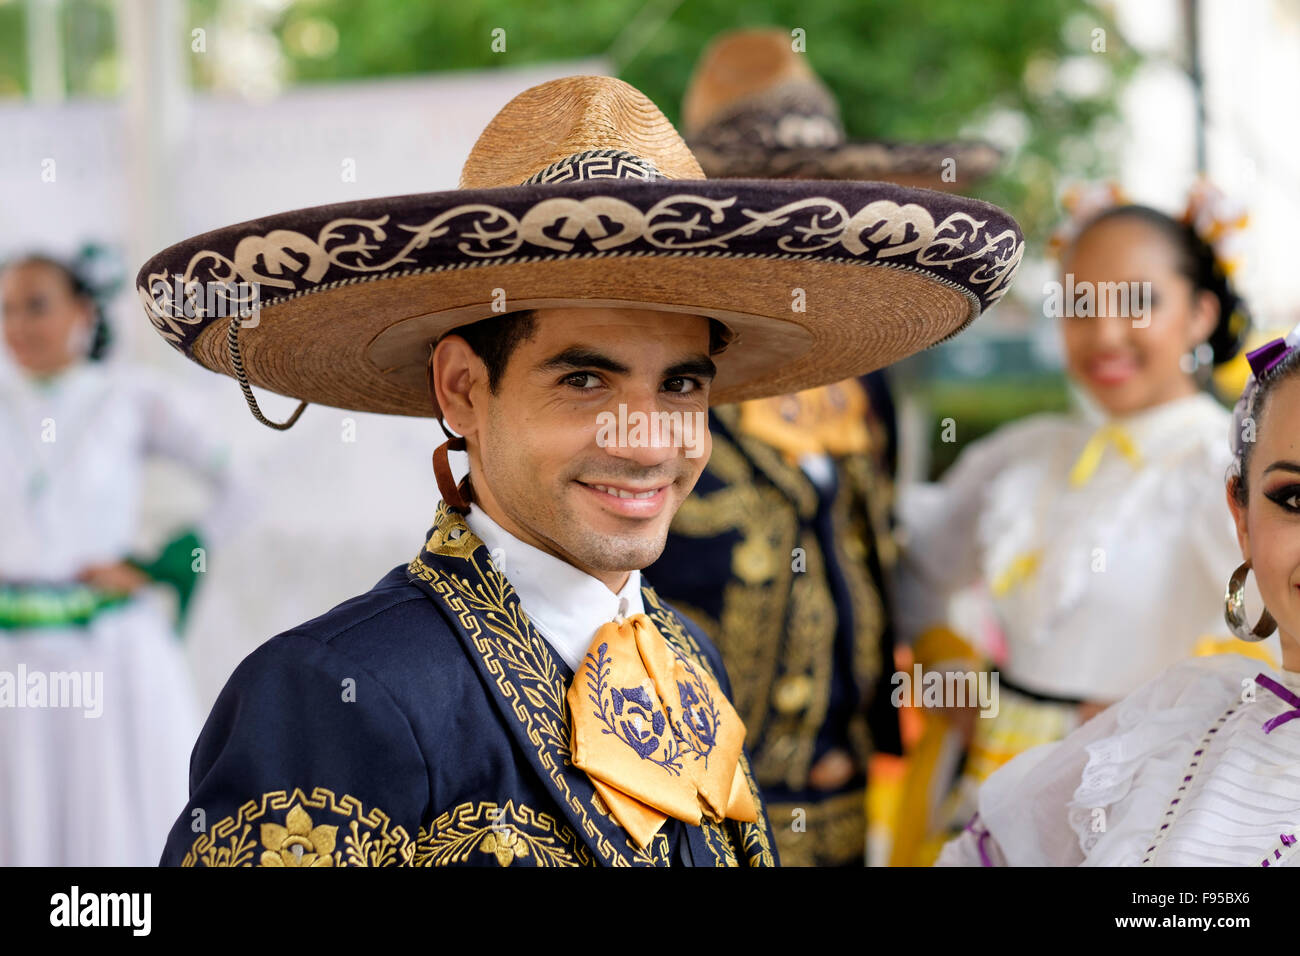 Male close up portrait. Puerto Vallarta, Jalisco, Mexico. Xiutla Dancers - a folkloristic Mexican dance group in traditional cos Stock Photo